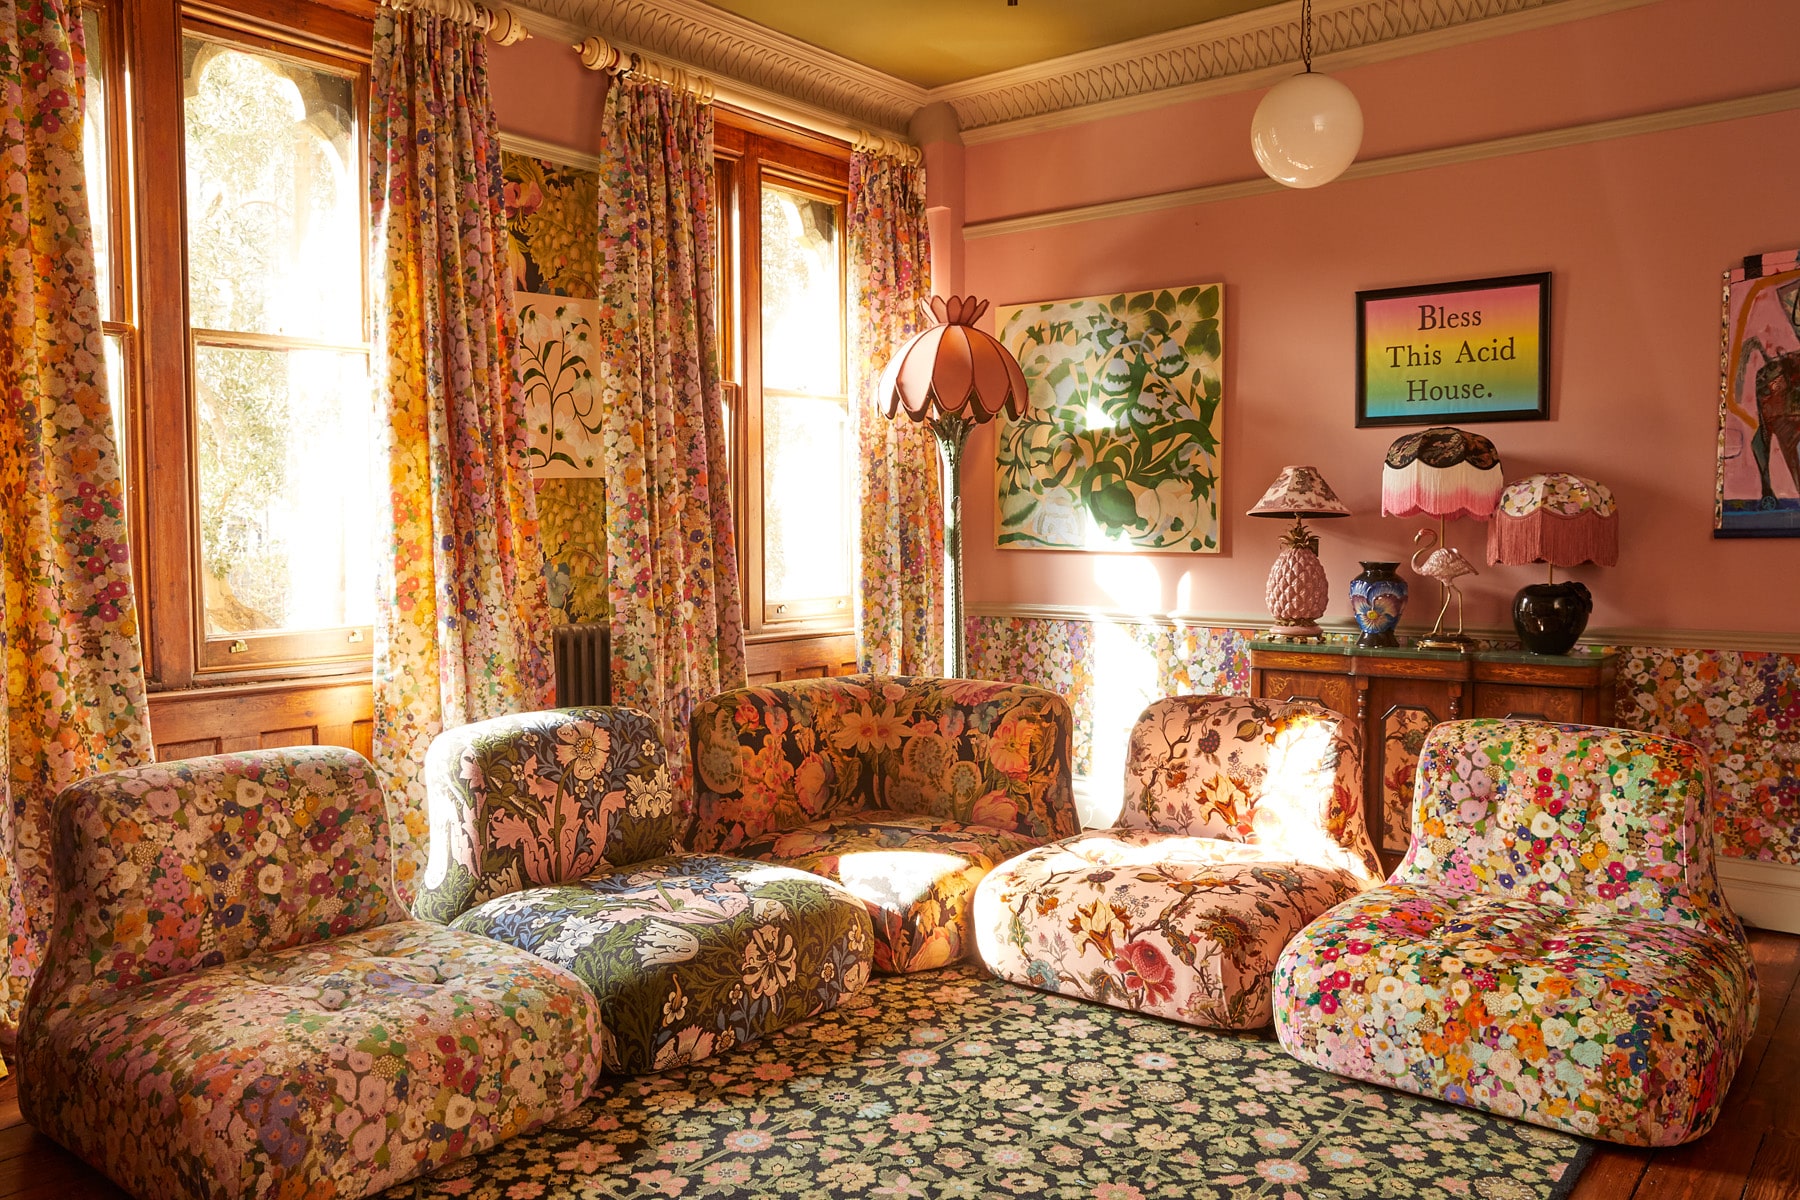 A room at House of Hackney's London flagship furnished with the brand's wallpaper, curtains, rug, lighting and seating in a variety of floral prints